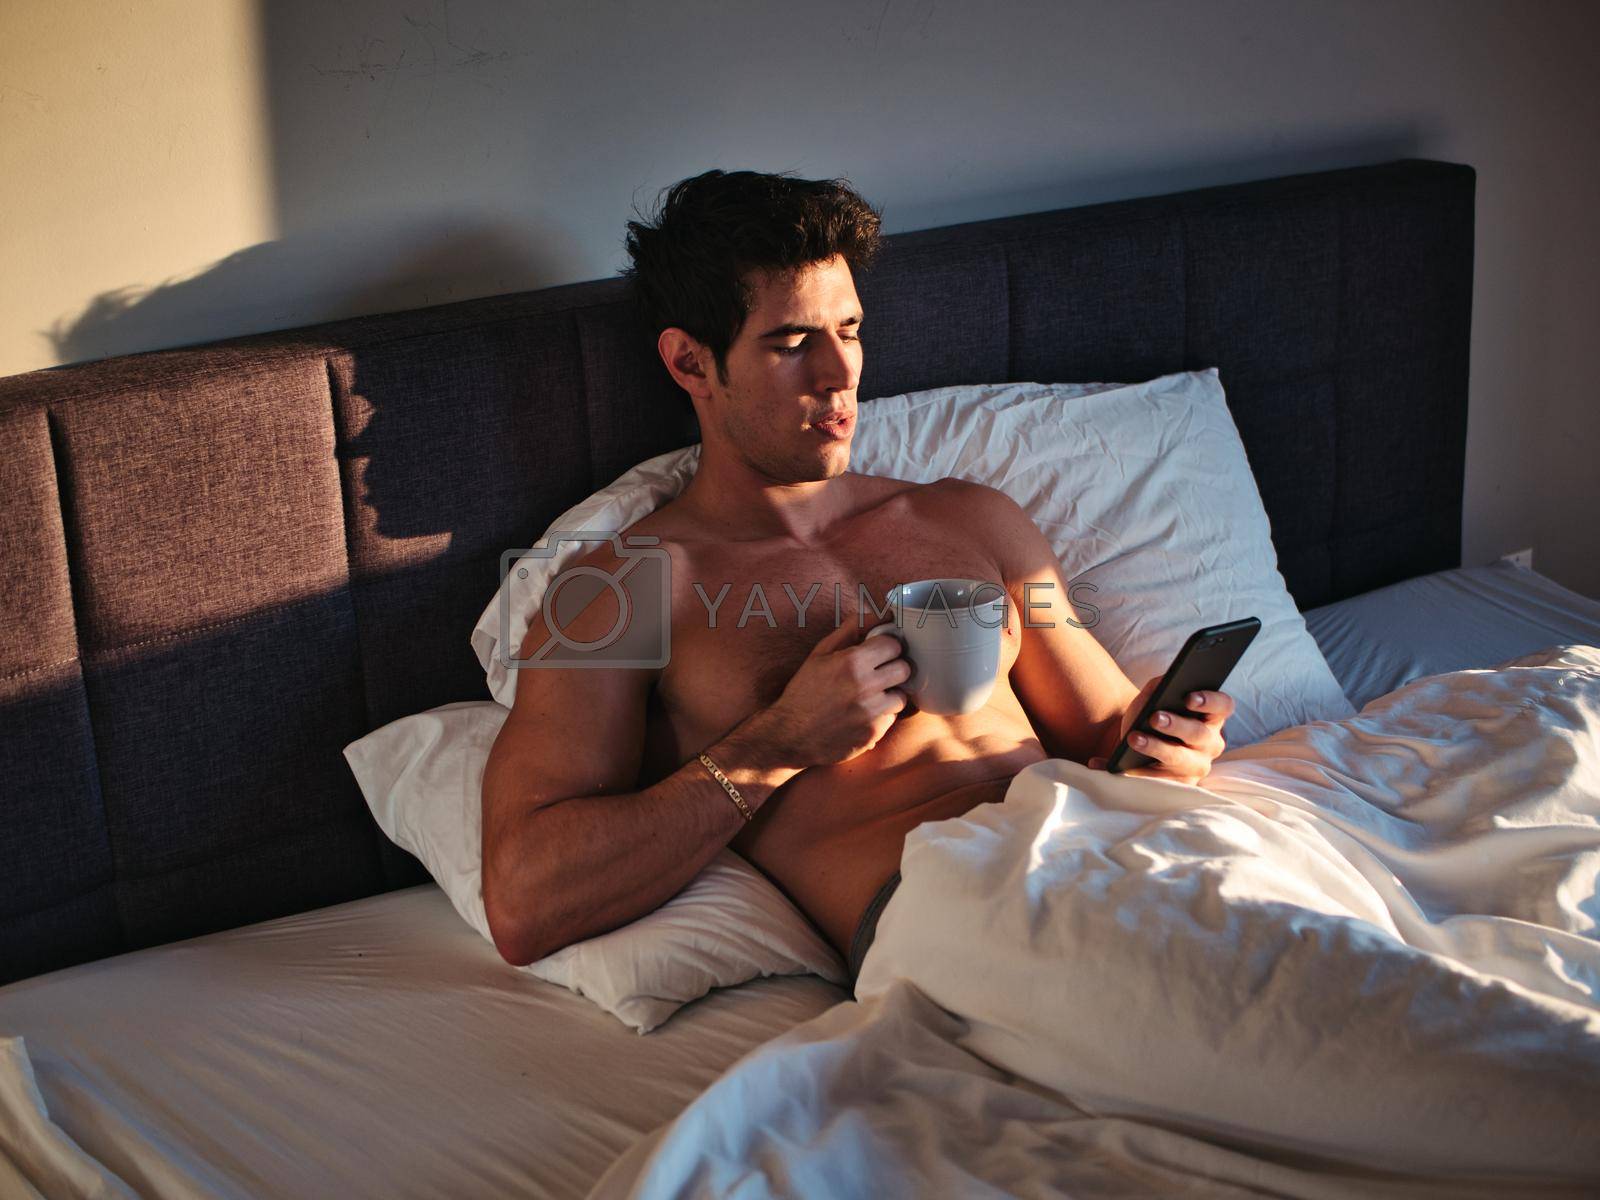 Royalty free image of Naked young man in bed with coffee or tea cup by artofphoto